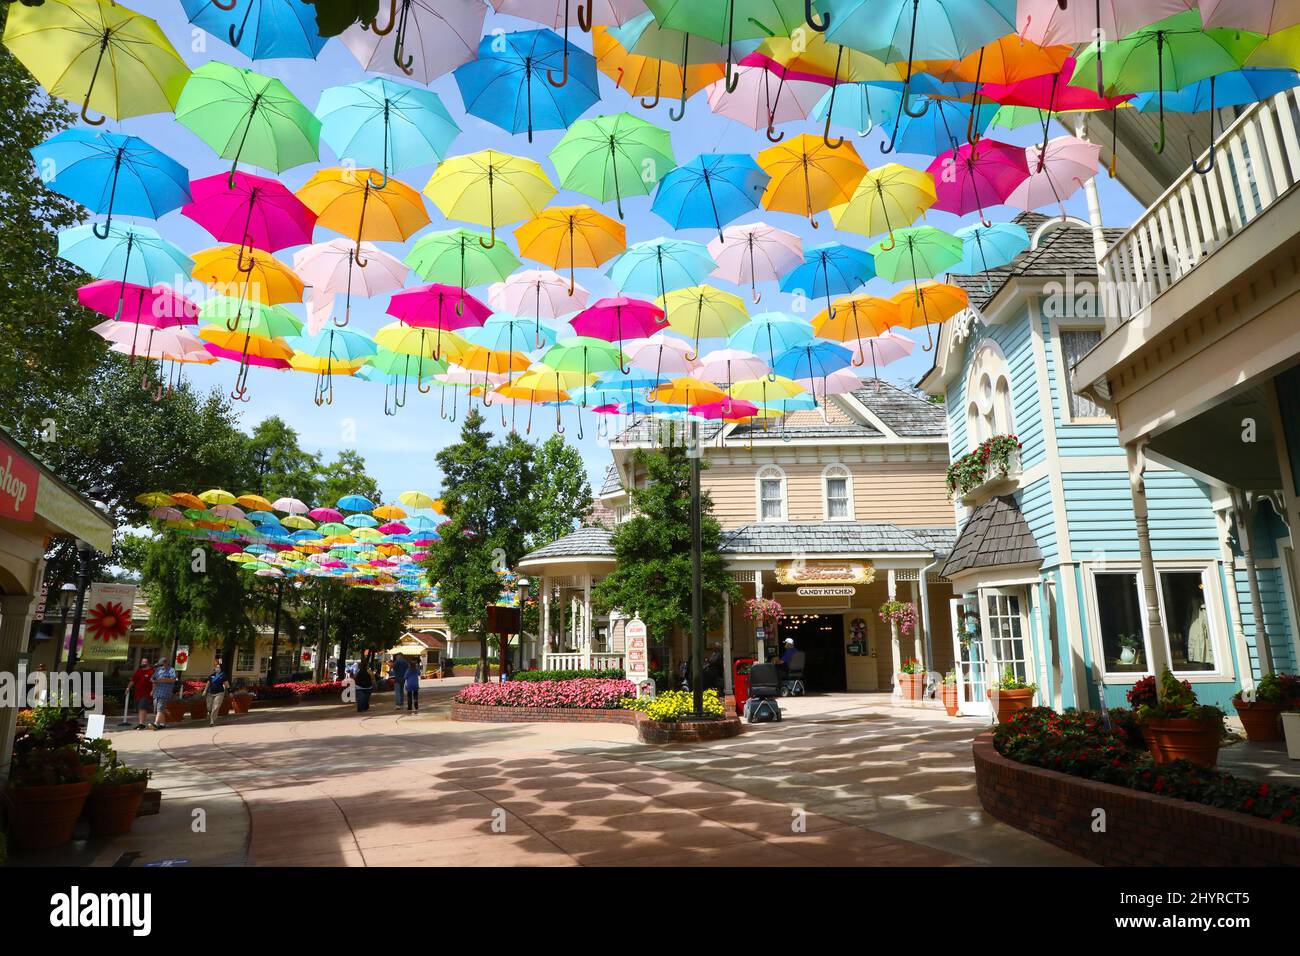 Atmosphere at the Dollywood Flower and Food Festival on June 28, 2020 in Pigeon Forge, TN. Dollywood reopened for the 35th Anniversary Season on June 15, 2020, delayed due to the COVID-19 pandemic. Stock Photo